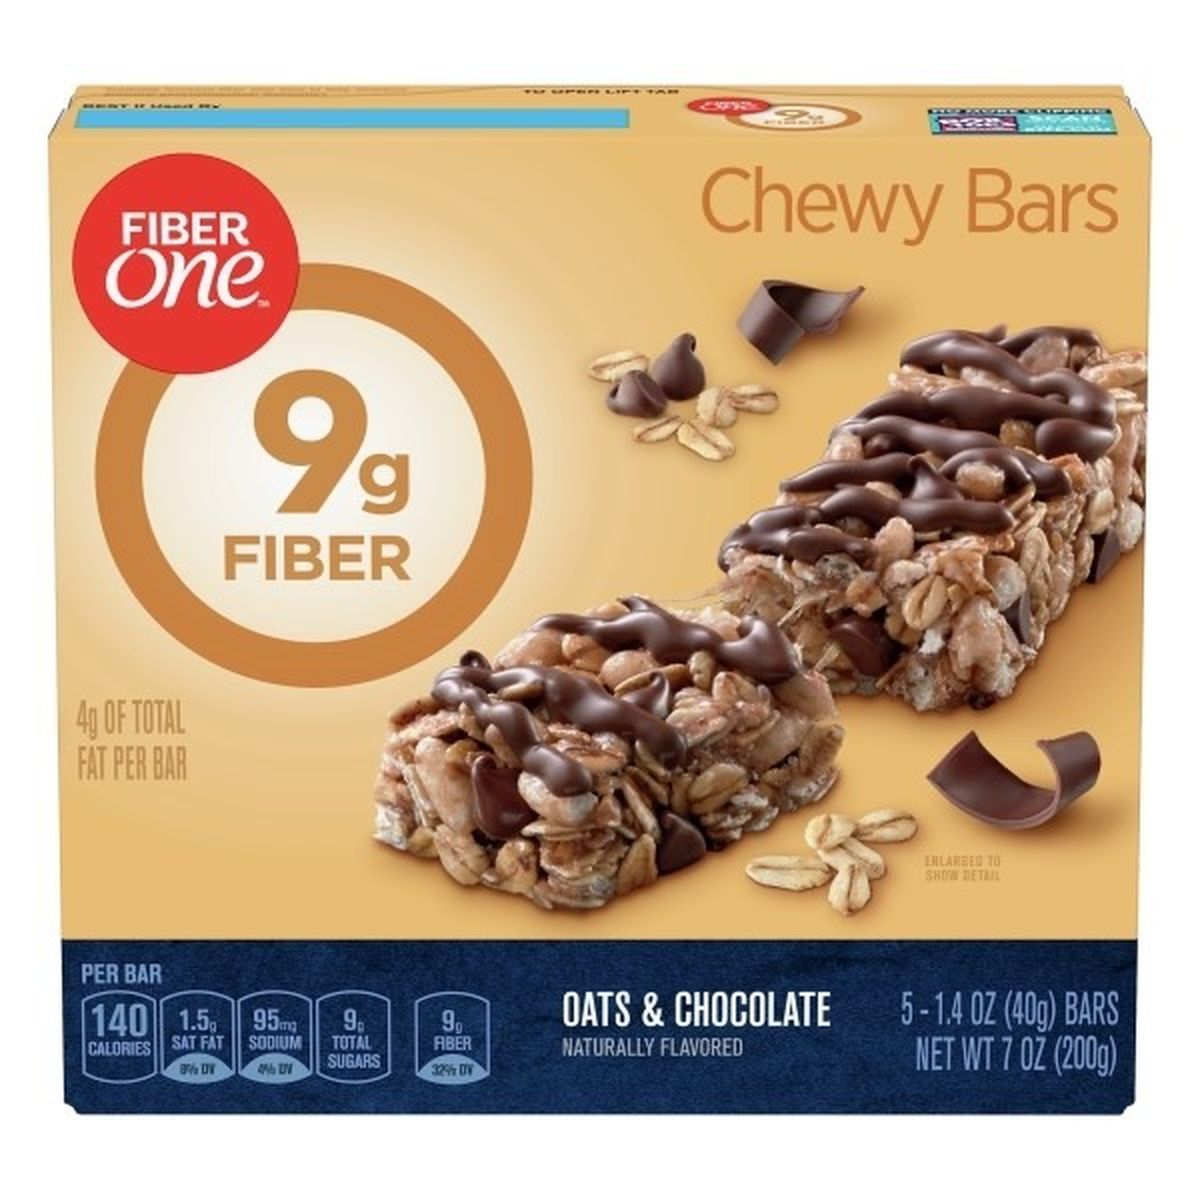 Calories in Fiber One Chewy Bars, Oats & Chocolate